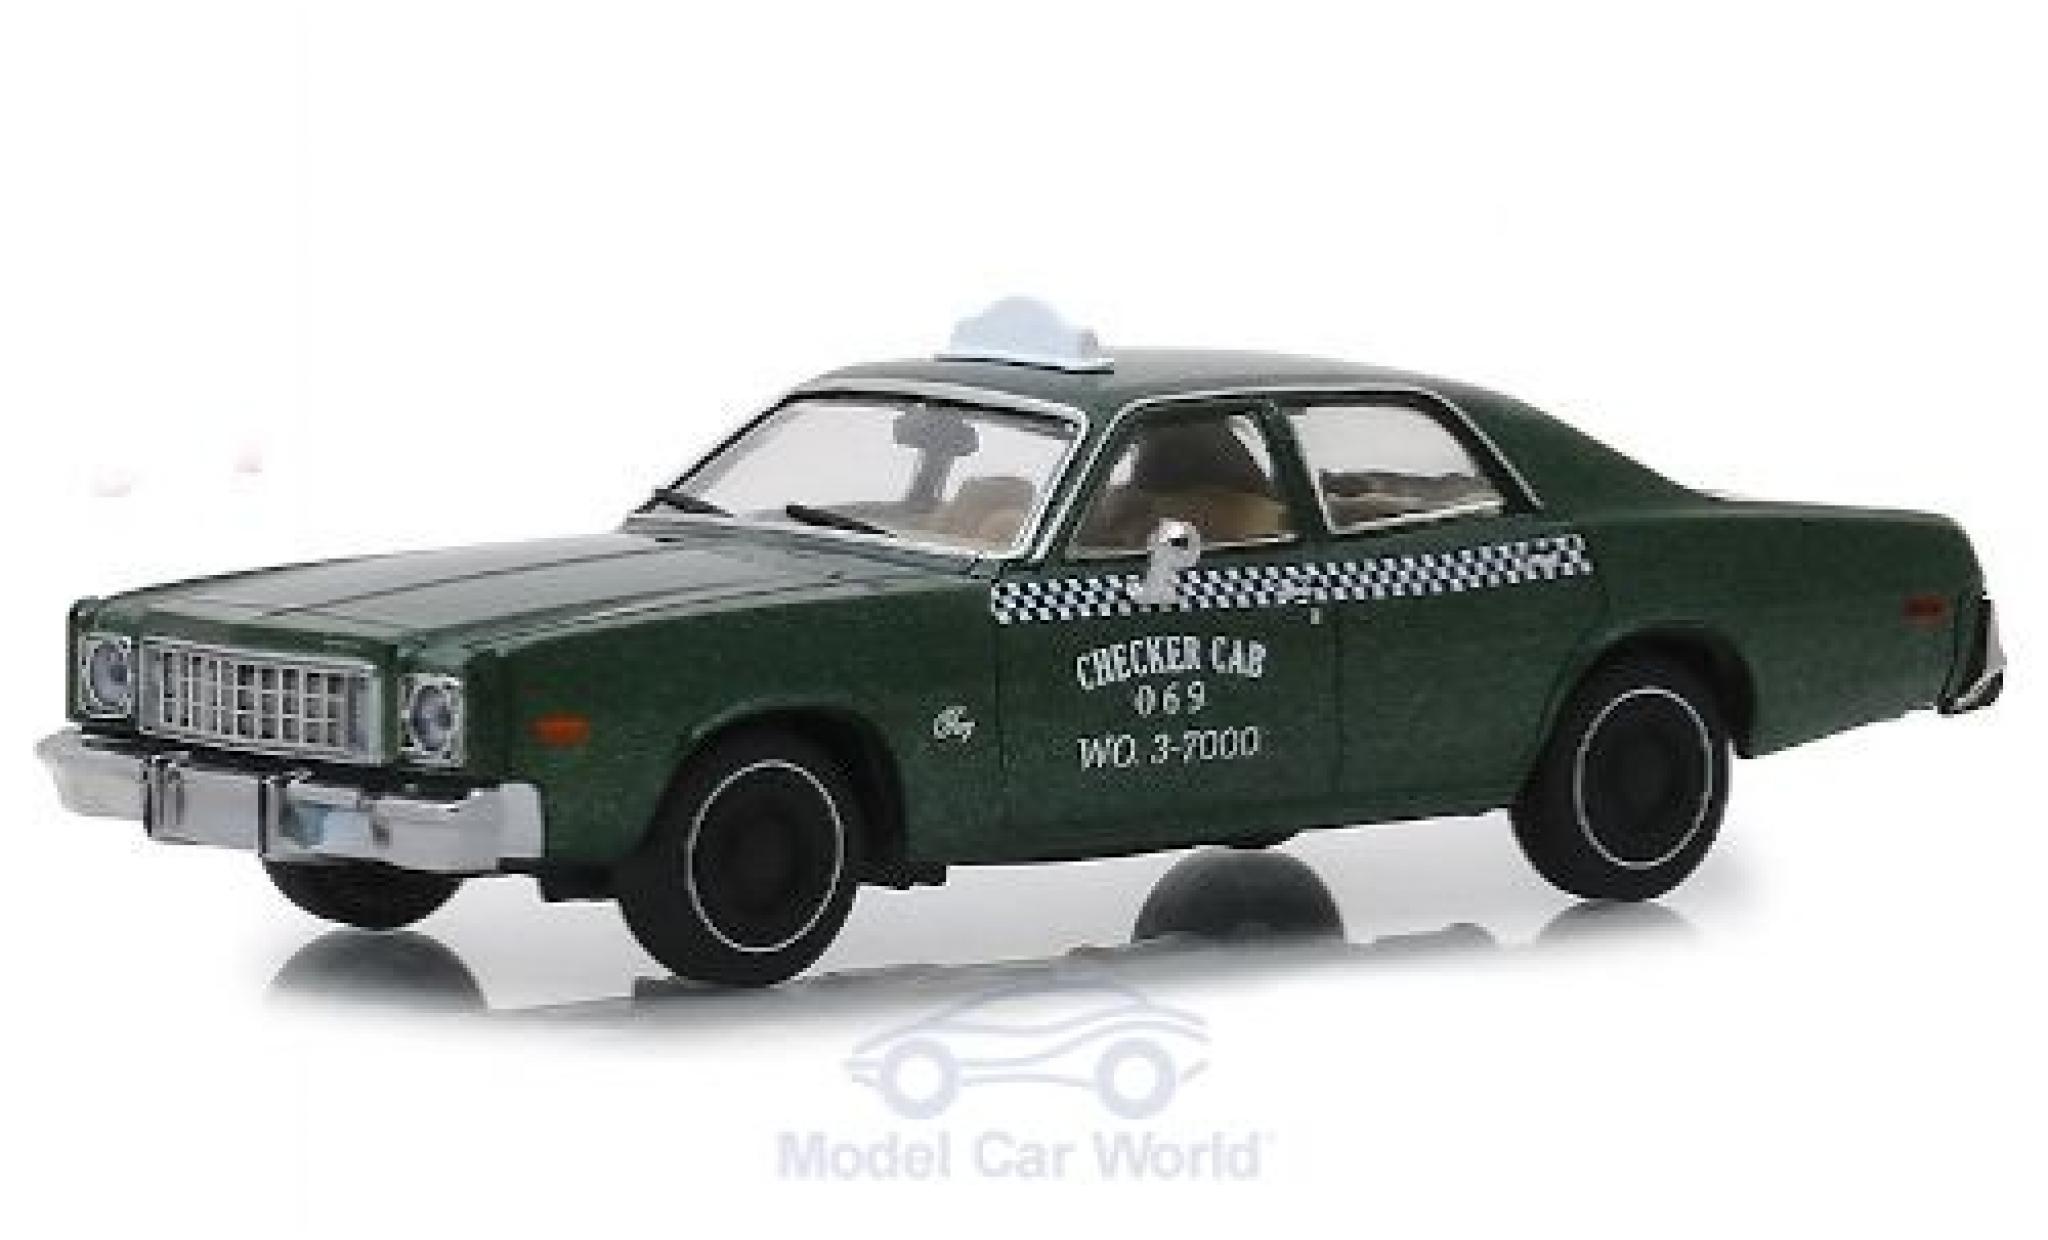 Plymouth Fury 1/43 Greenlight Checker Cab 1976 Beverly Hills Cop